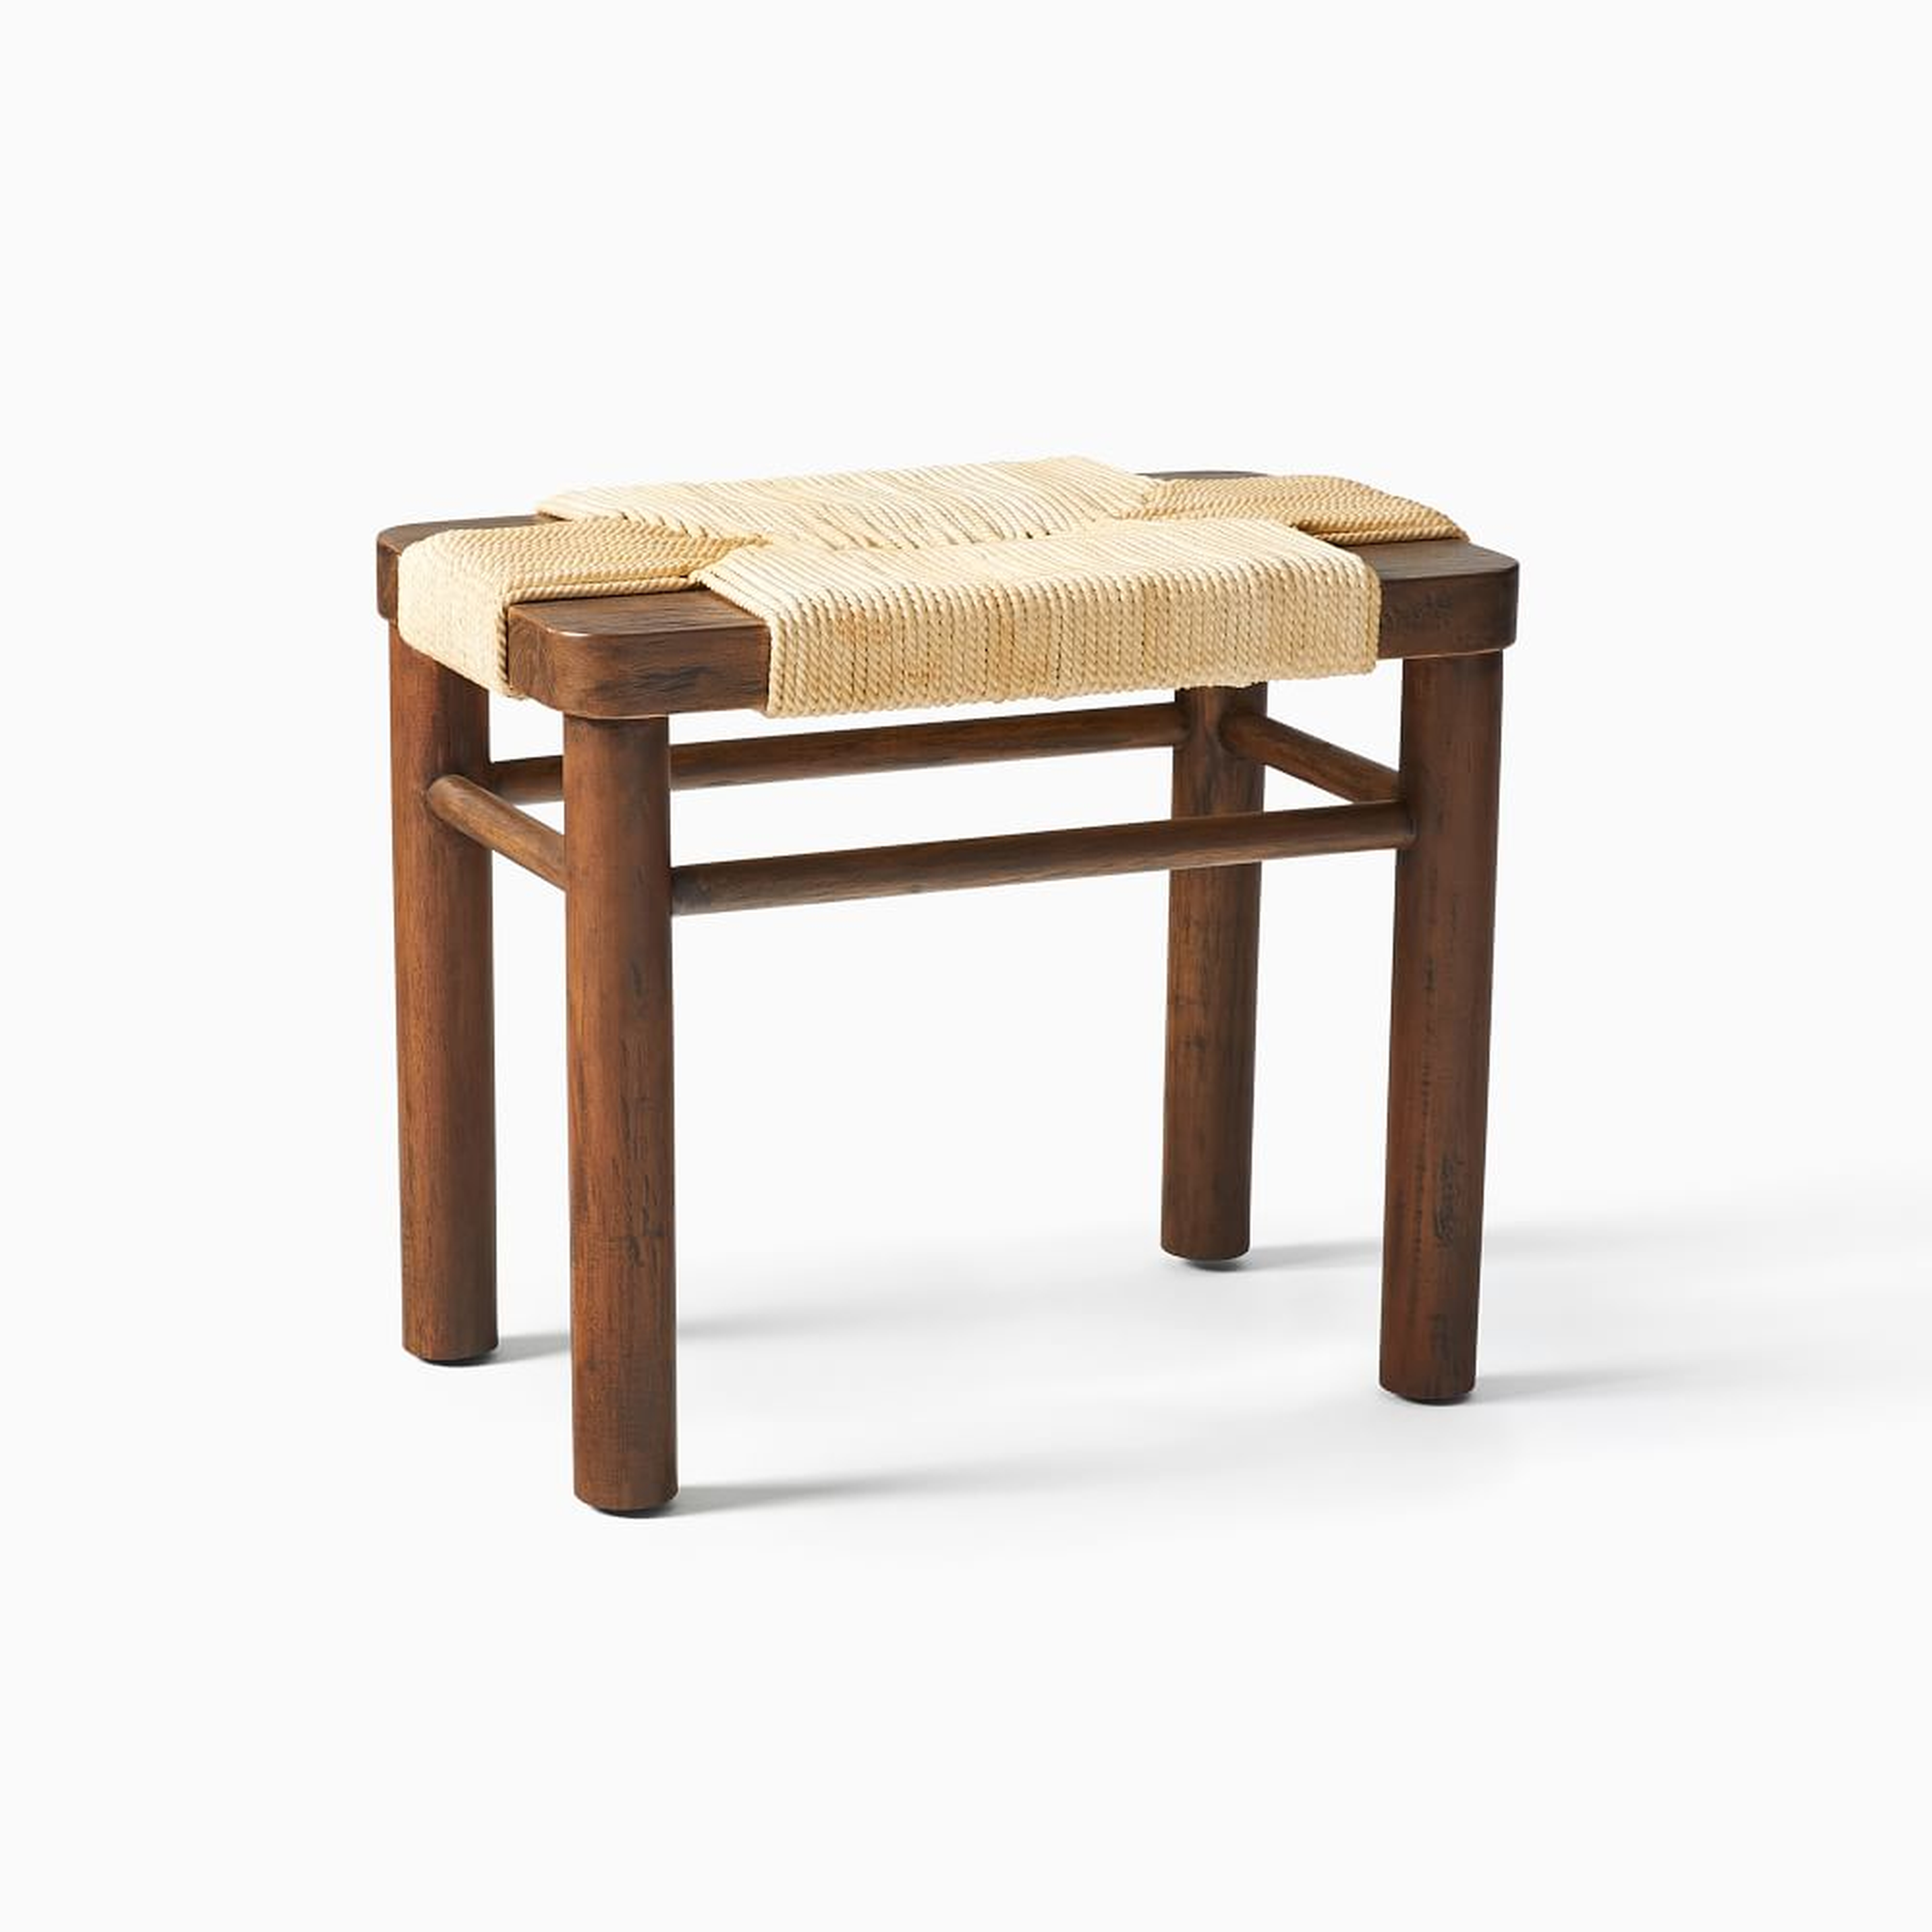 Mahogany Woven Rope Stool, Vintage Cotton - West Elm